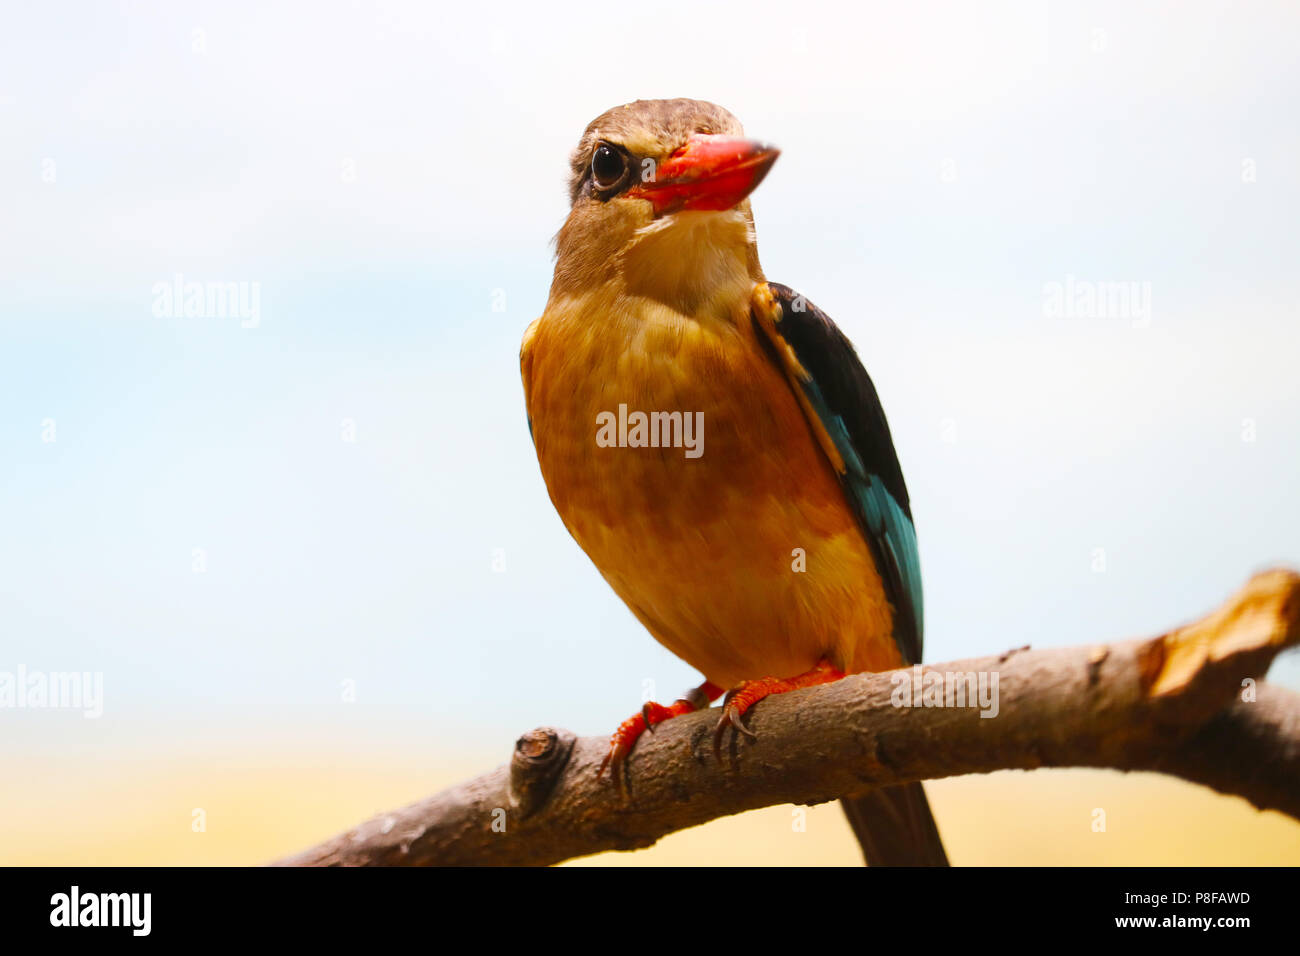 Brown-hooded kingfisher (halcyon albiventris) with a long red beak sitting on a branch Stock Photo